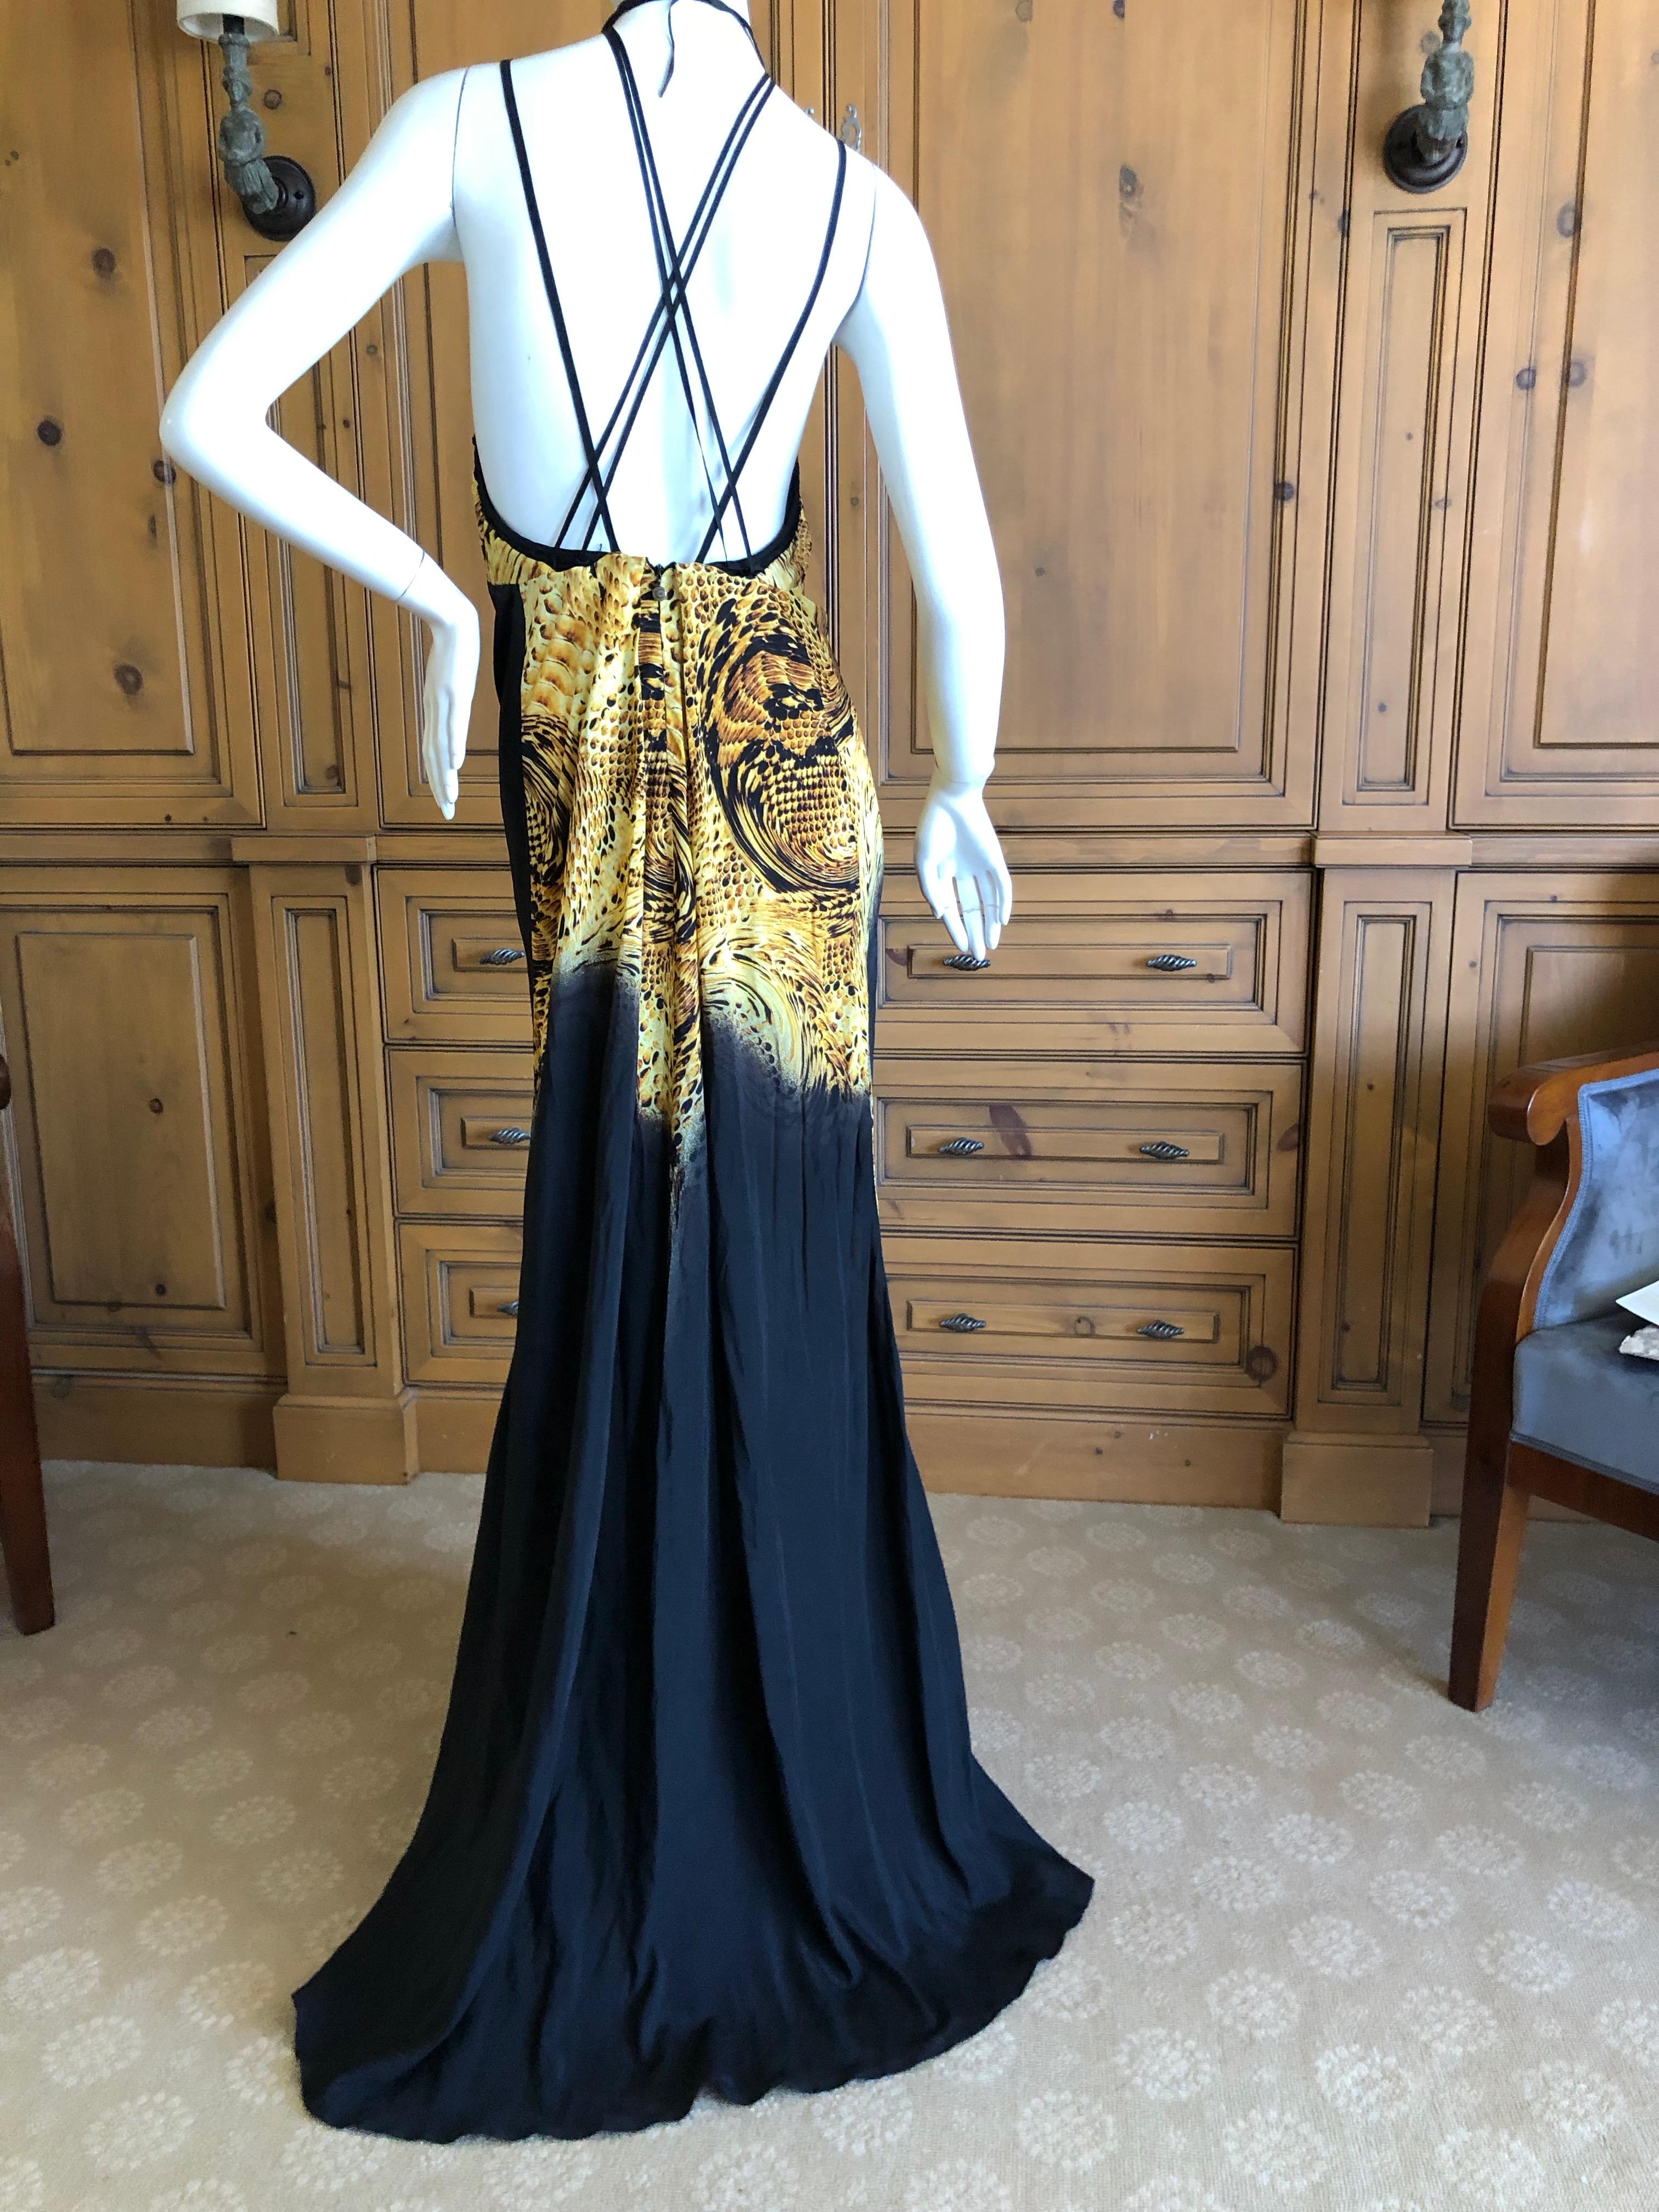 Roberto Cavalli for Just Cavalli Vintage Backless Halter Style Evening Dress.
So pretty, the ties on the back I'm not certain how they were styled.
Size 40
Bust 34